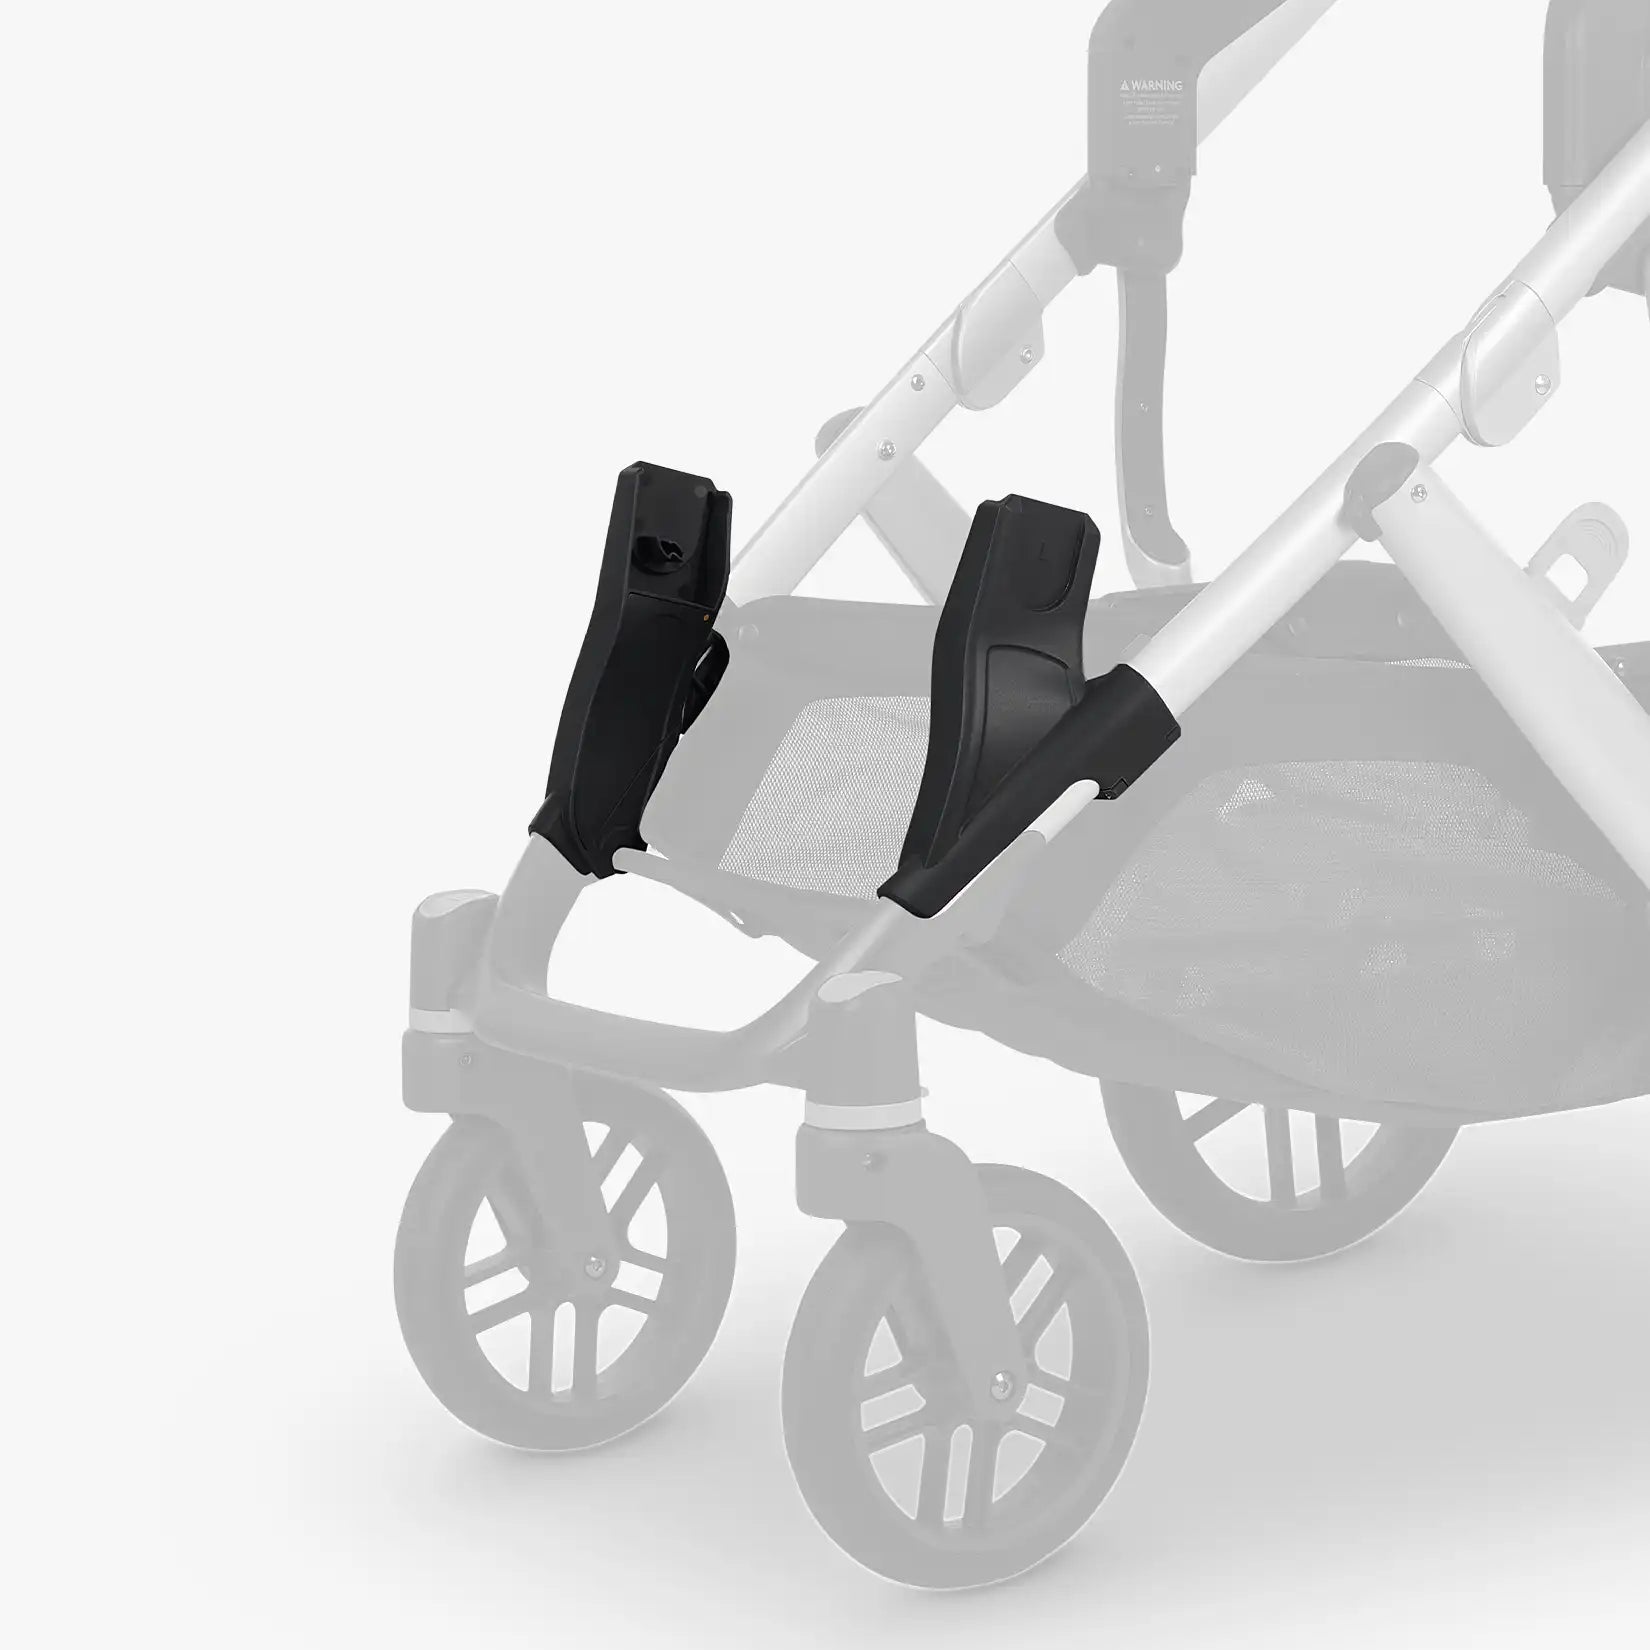 UPPAbaby Lower Adapter for Vista and Vista V2, Maxi-Cosi®, Nuna®, Cybex, and BeSafe® - ANB Baby -817609018738$20 - $50